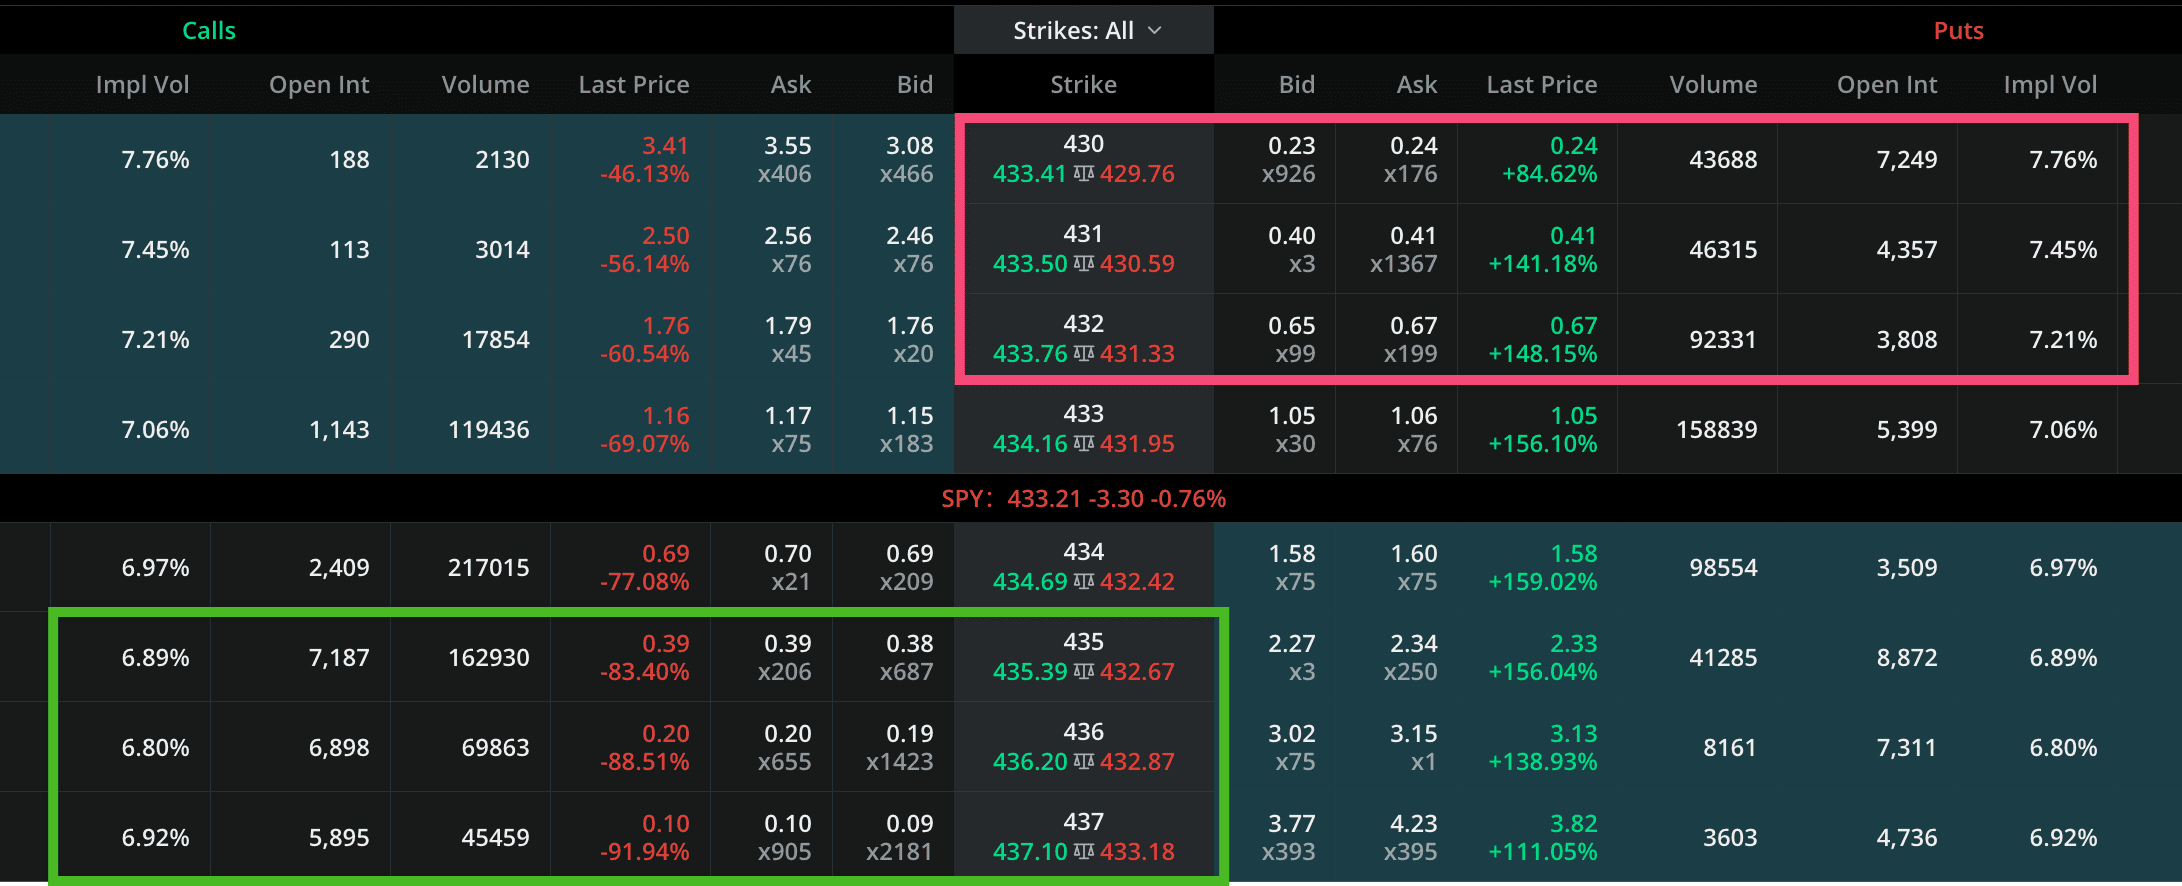 option chain showing out of the money options